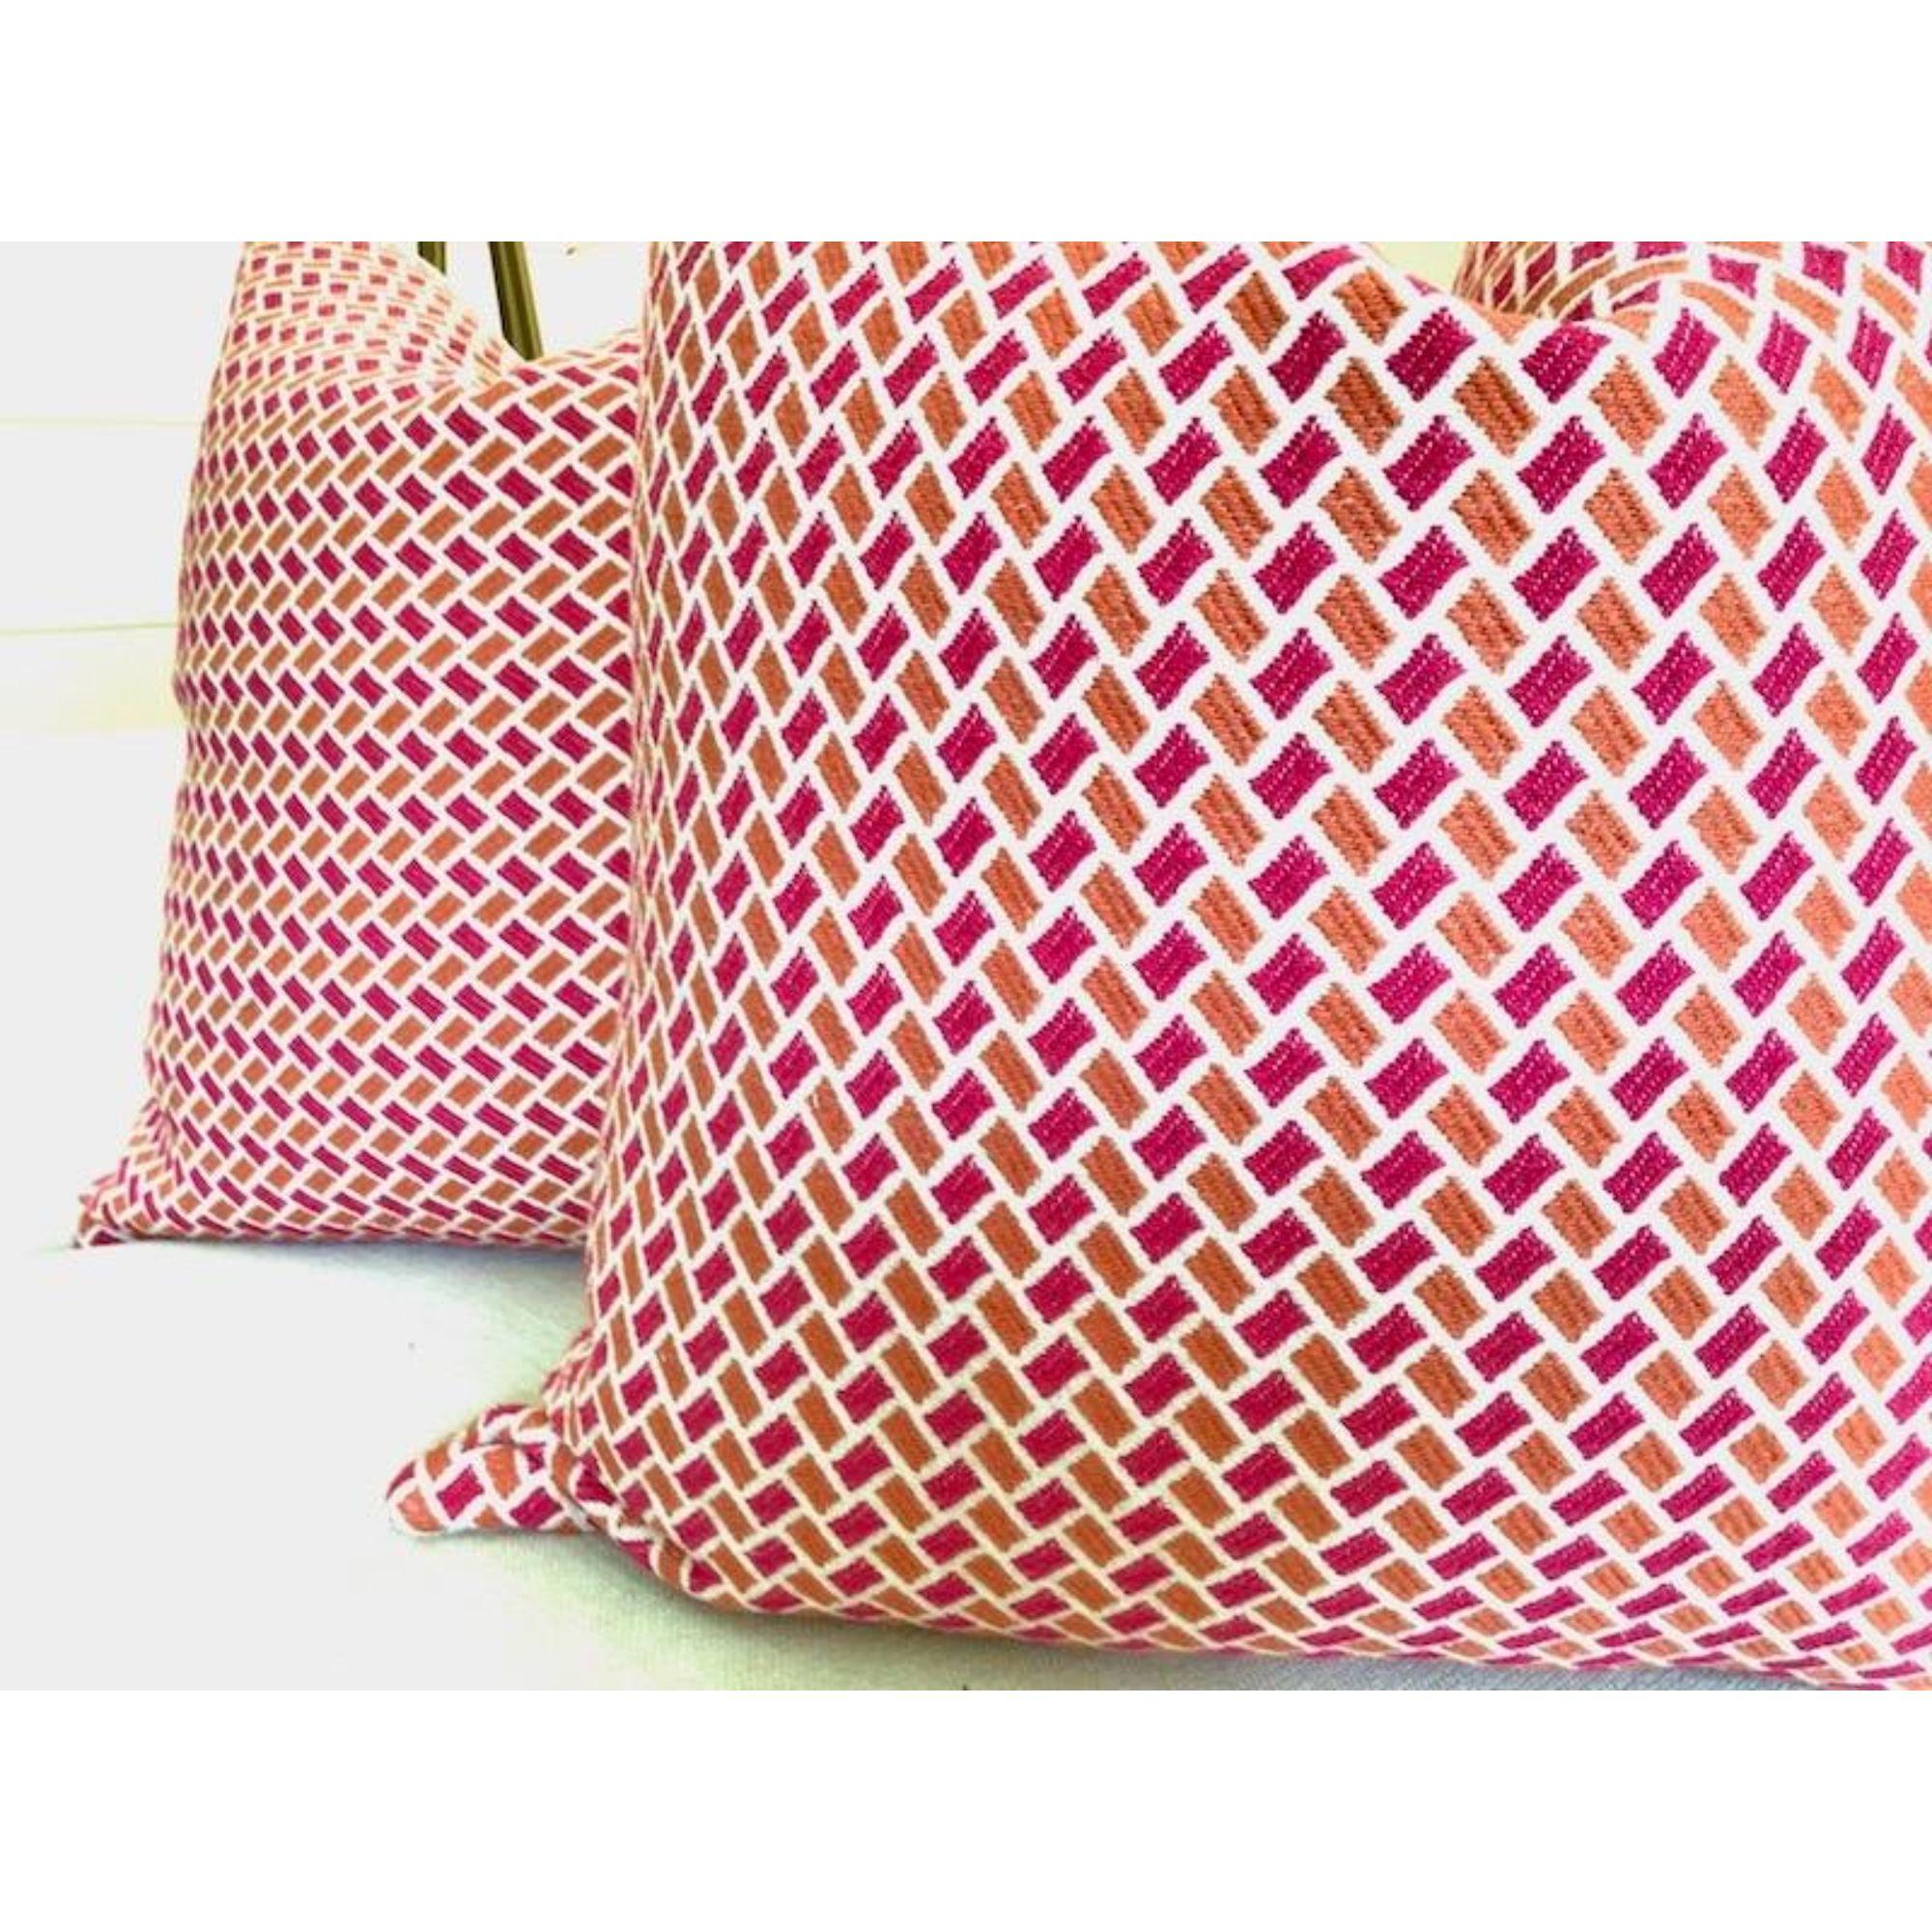 American Brunschwig & Fils “Briquetage” in Hot Pink & Coral Orange Pillows - a Pair For Sale